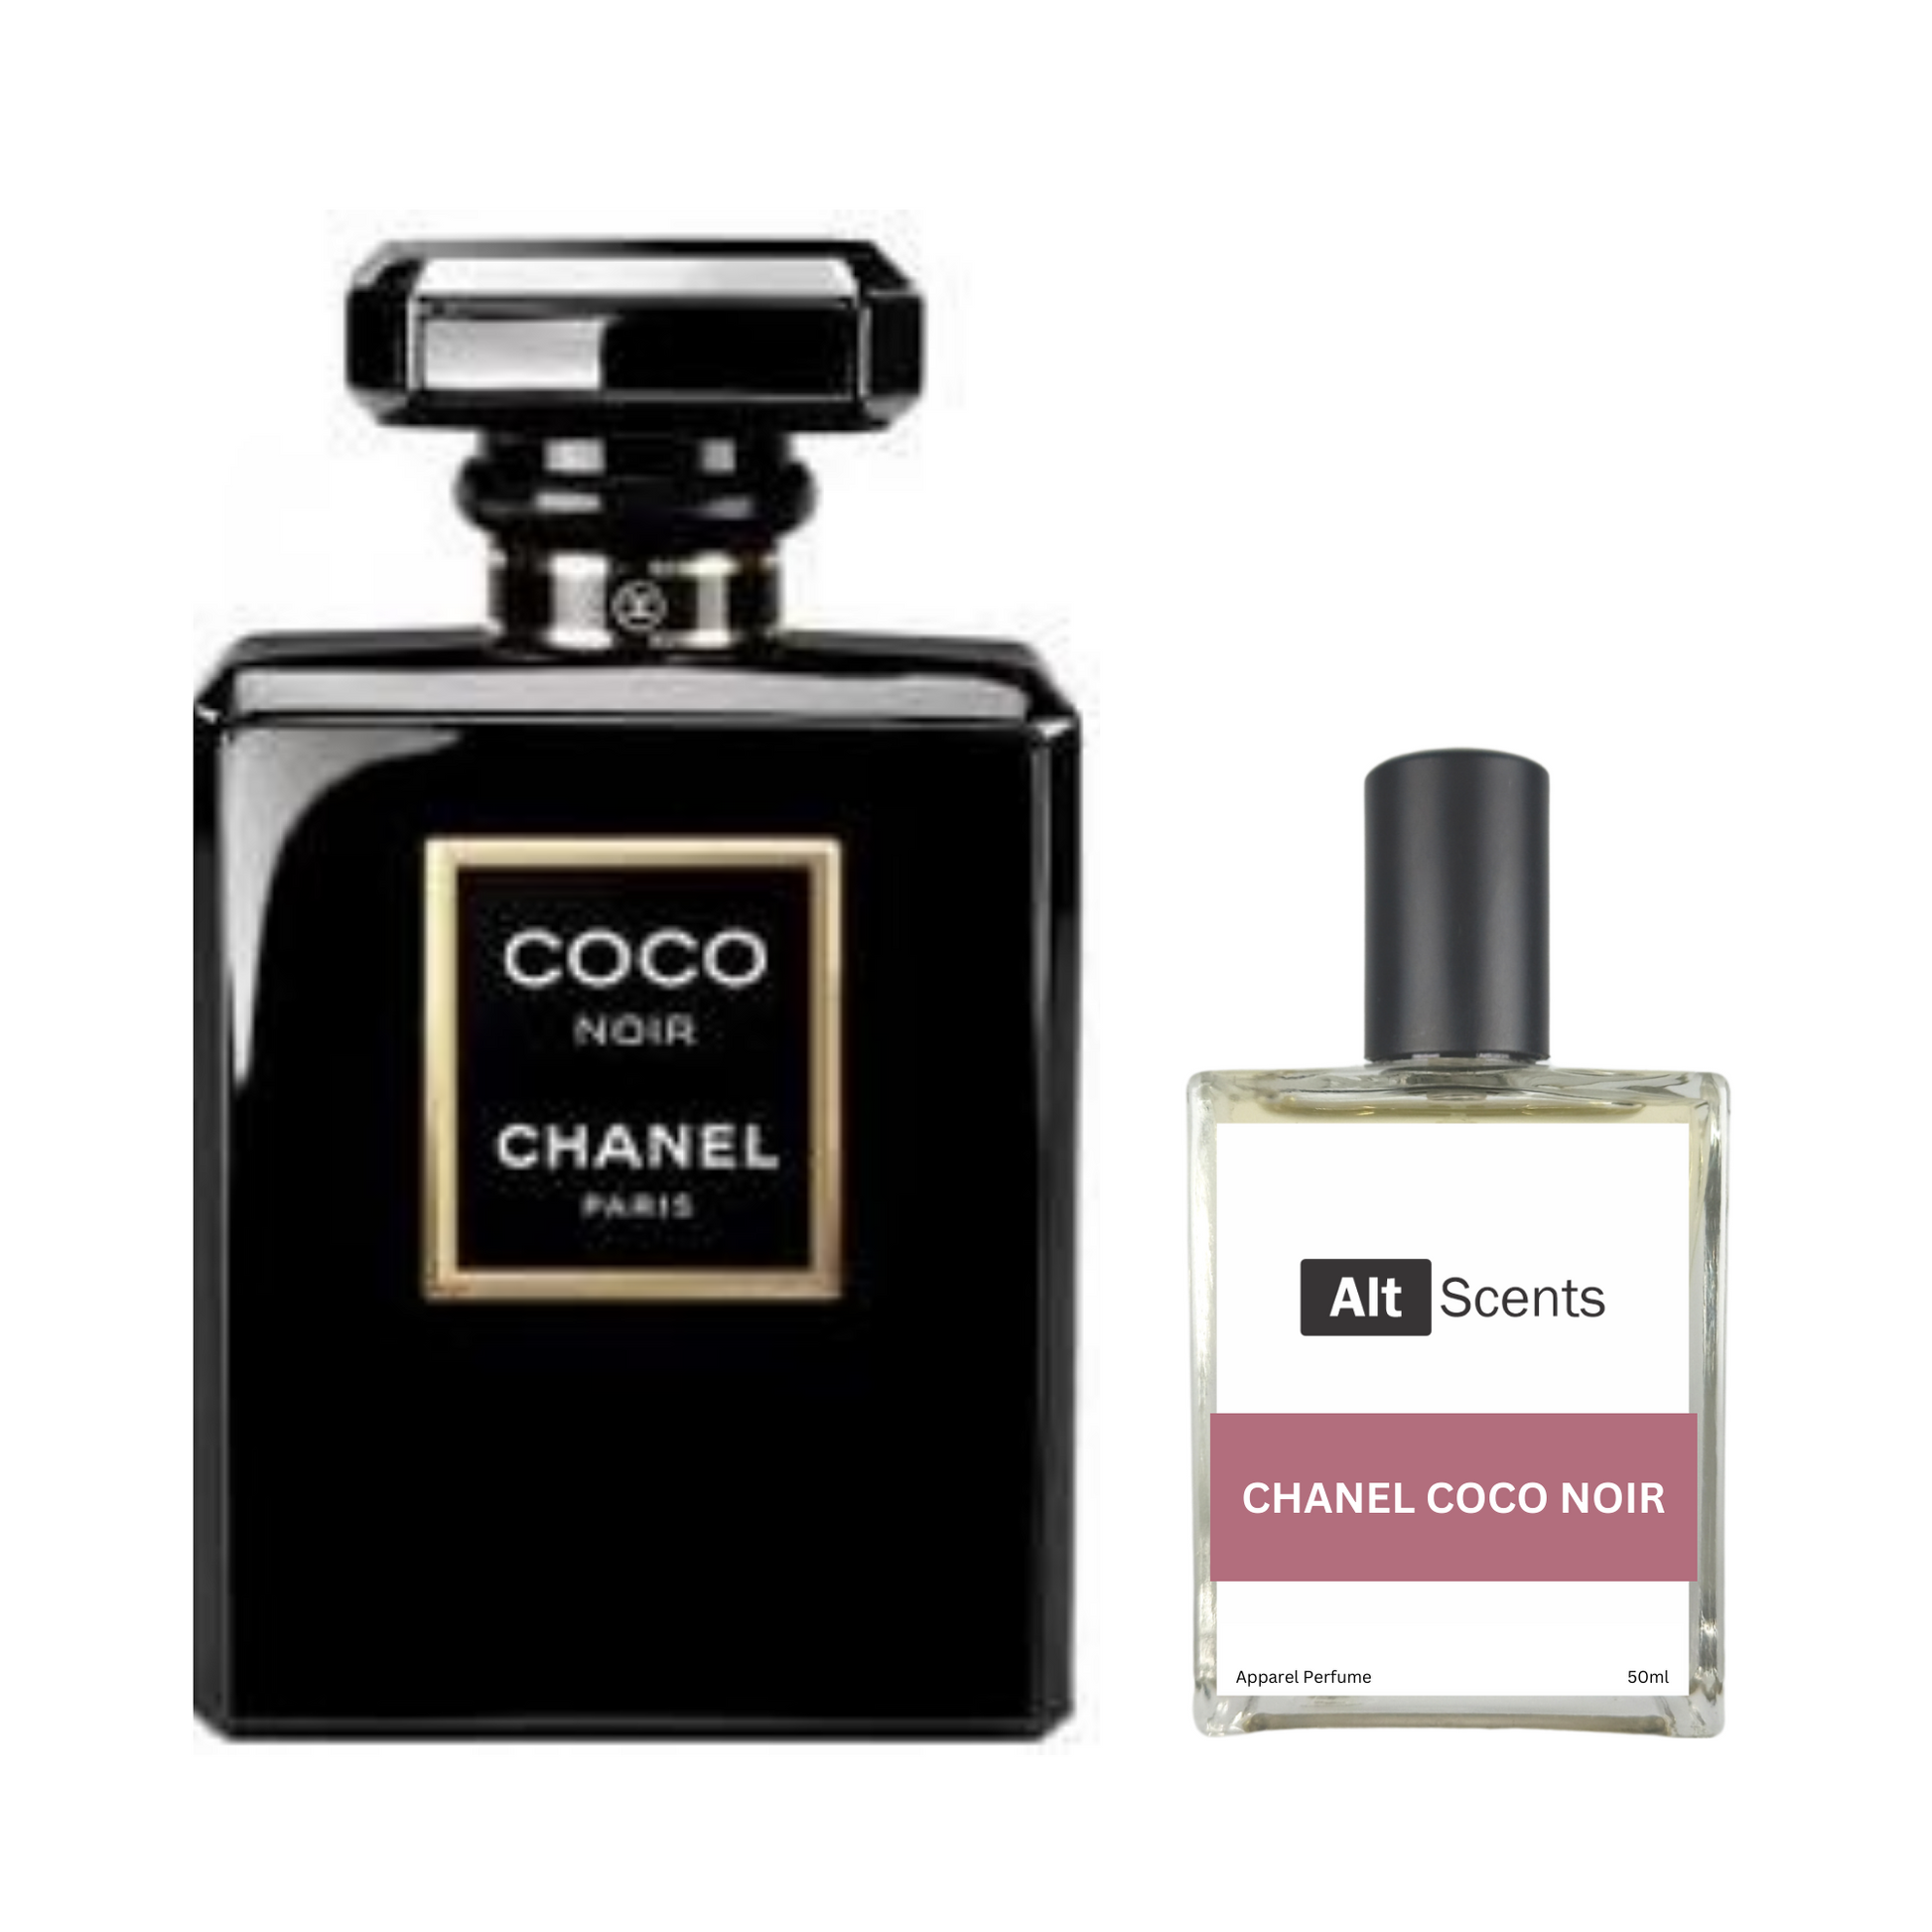 Chanel Coco Noir type Perfume for Women – Altscents